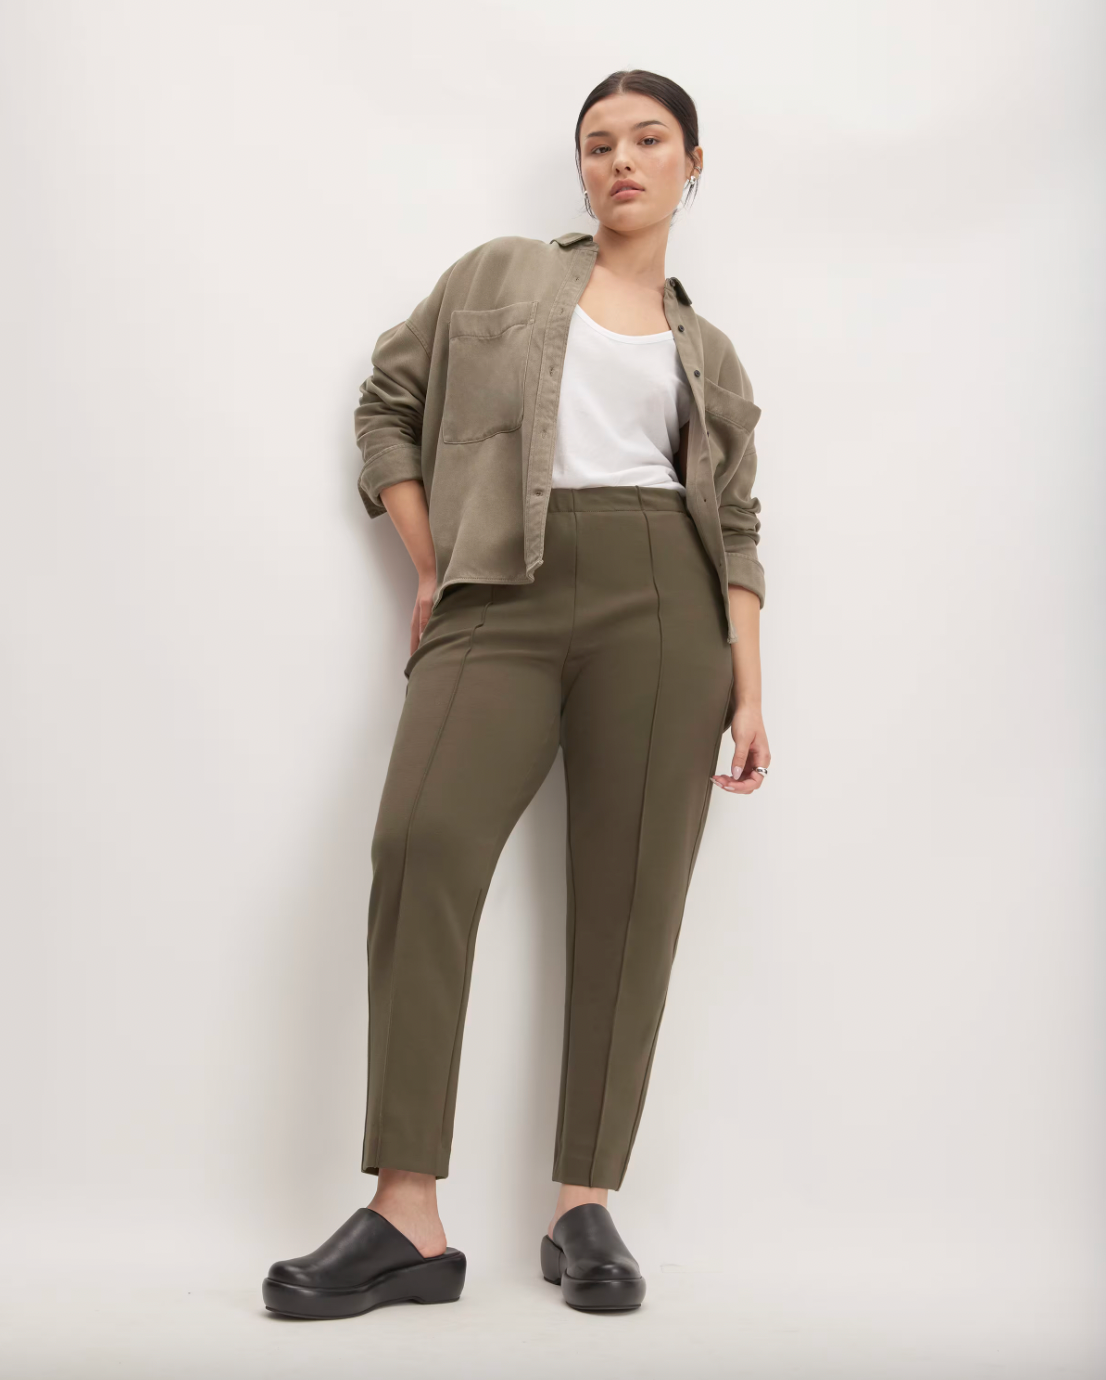 Casual Office Outfit: Cardigan and Wide Leg Trousers